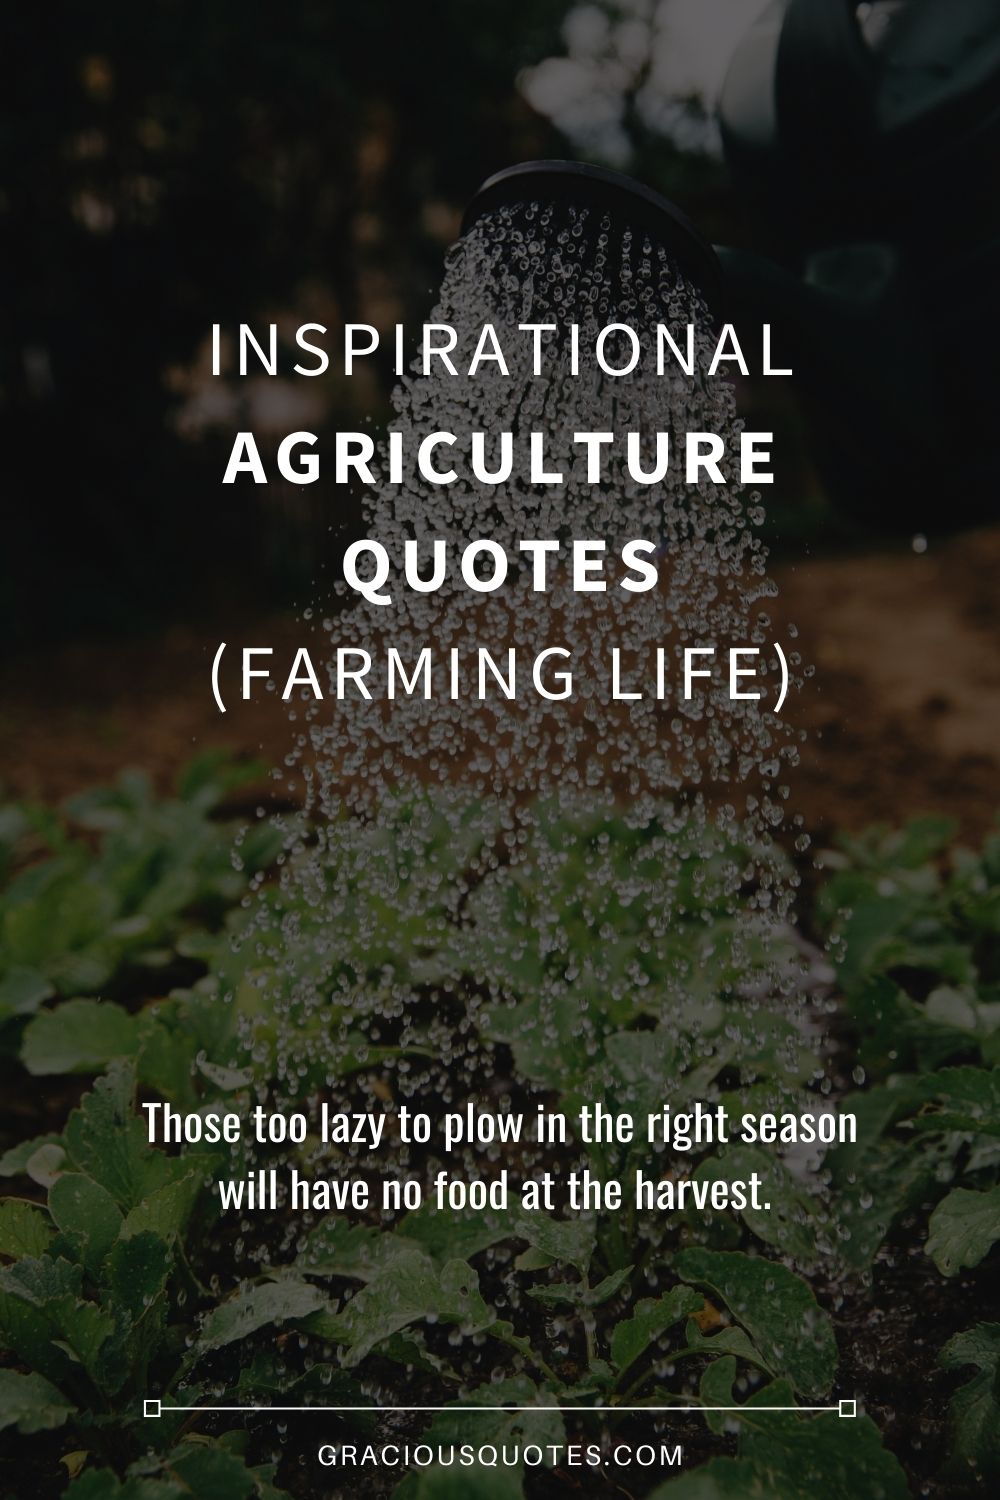 Inspirational Agriculture Quotes (FARMING LIFE) - Gracious Quotes